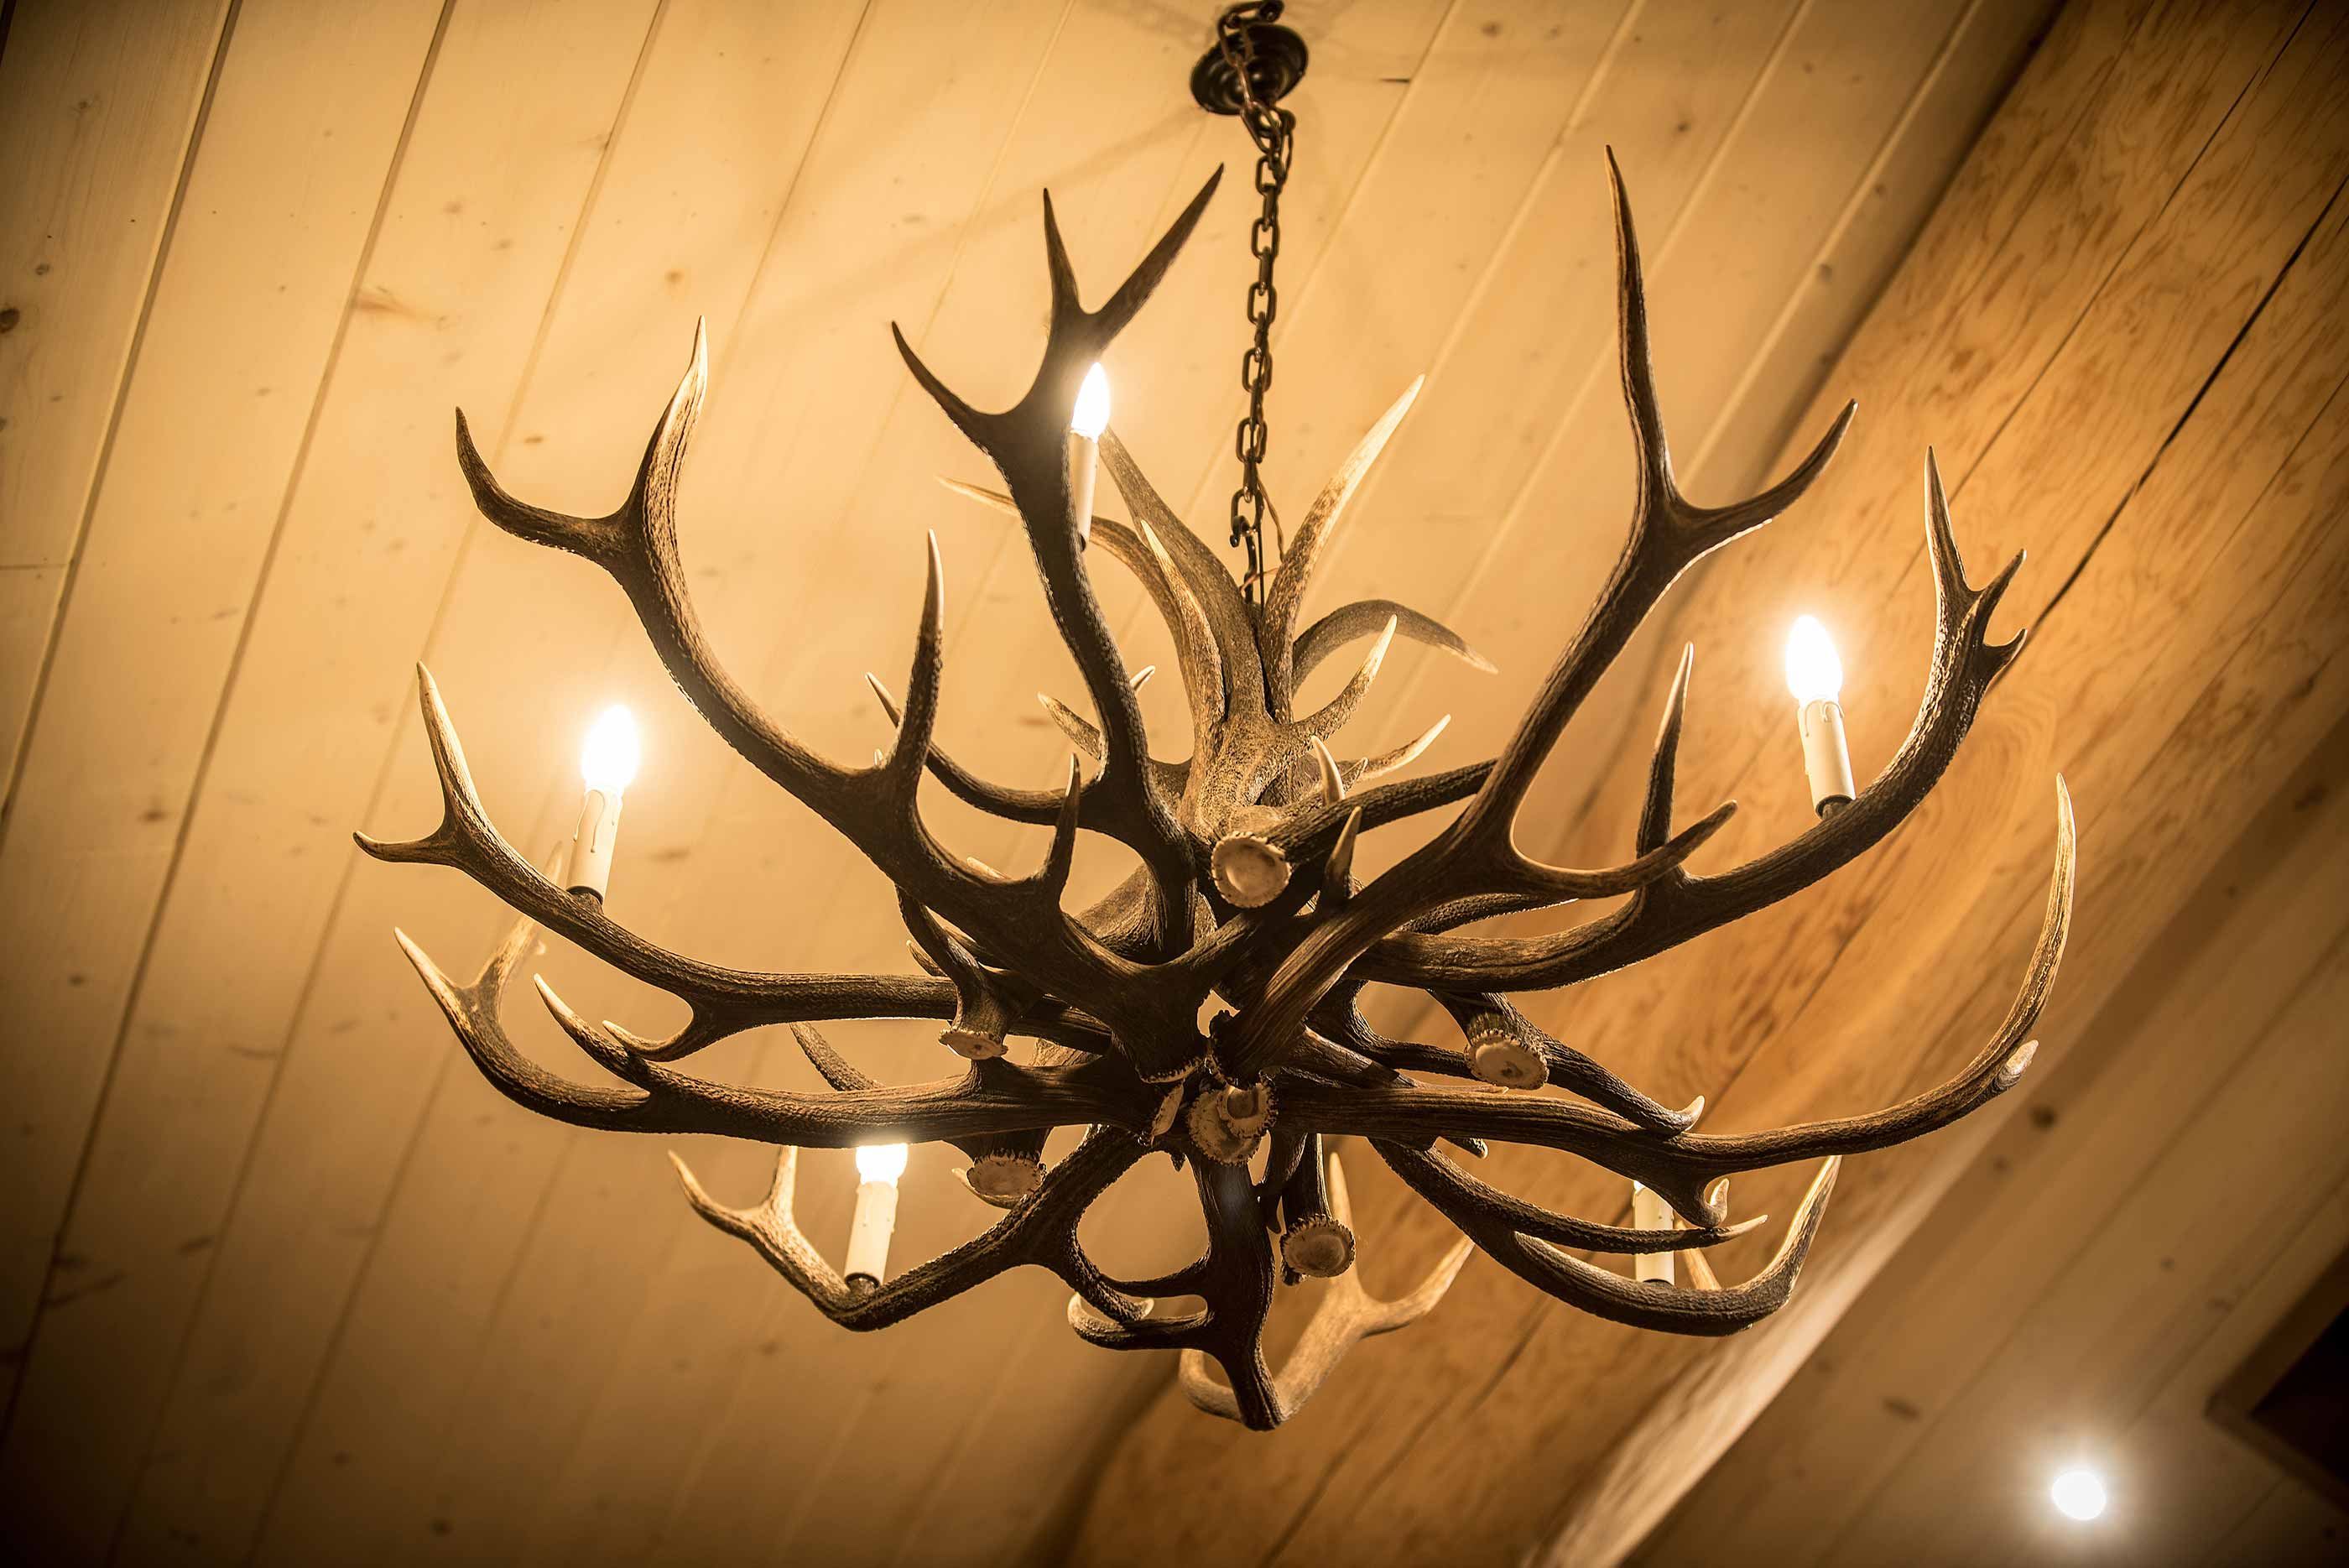 How To Make An Antler Chandelier Step, How To Make A Lamp Using Deer Antlers